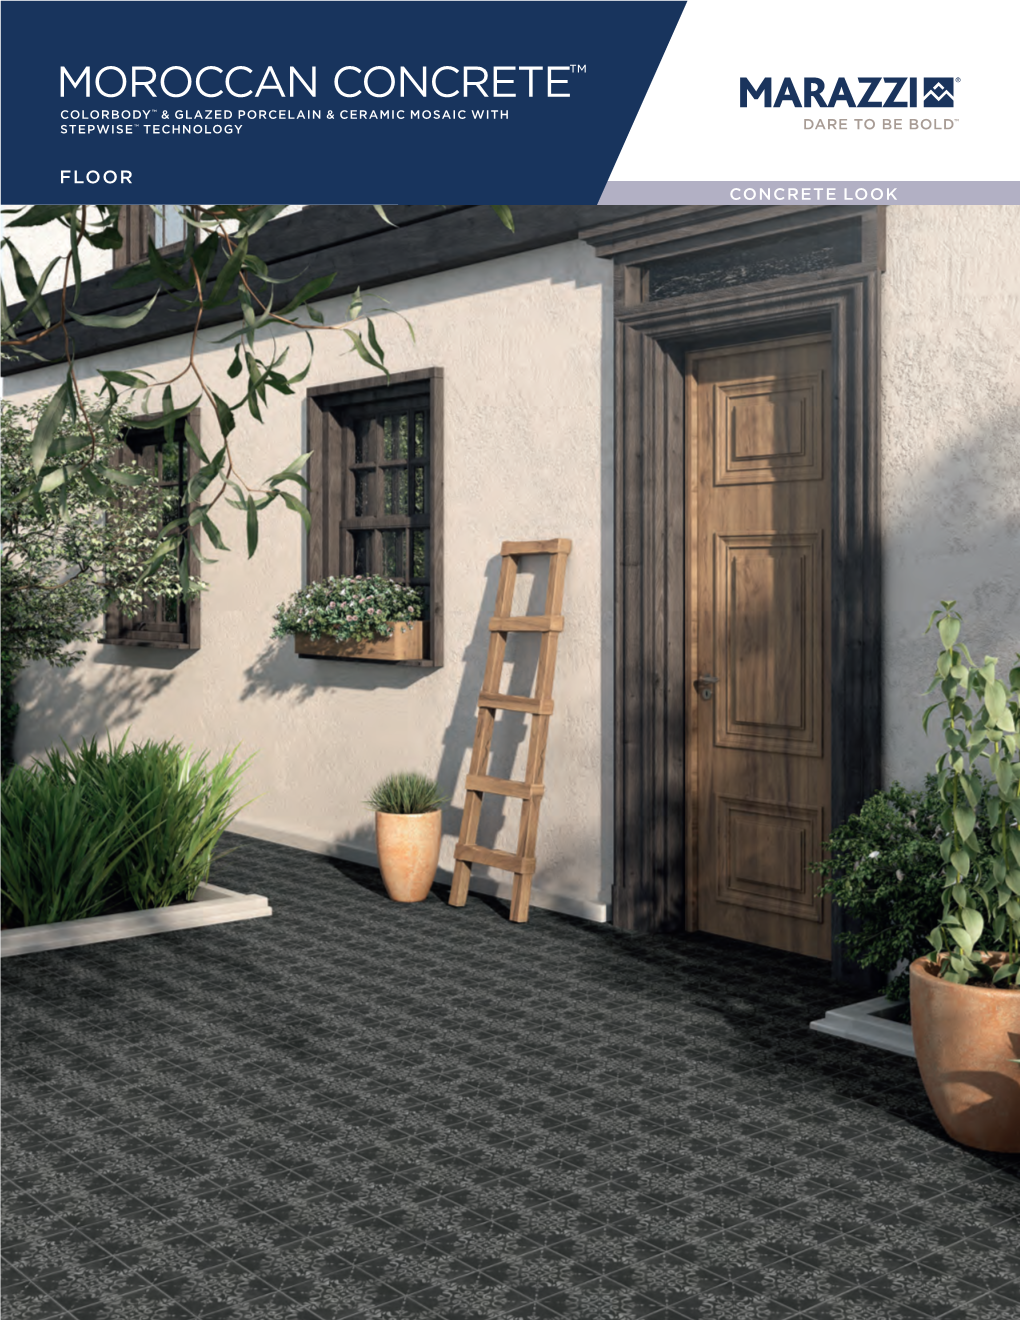 Moroccan Concrete™ Colorbody™ & Glazed Porcelain & Ceramic Mosaic with Stepwise™ Technology